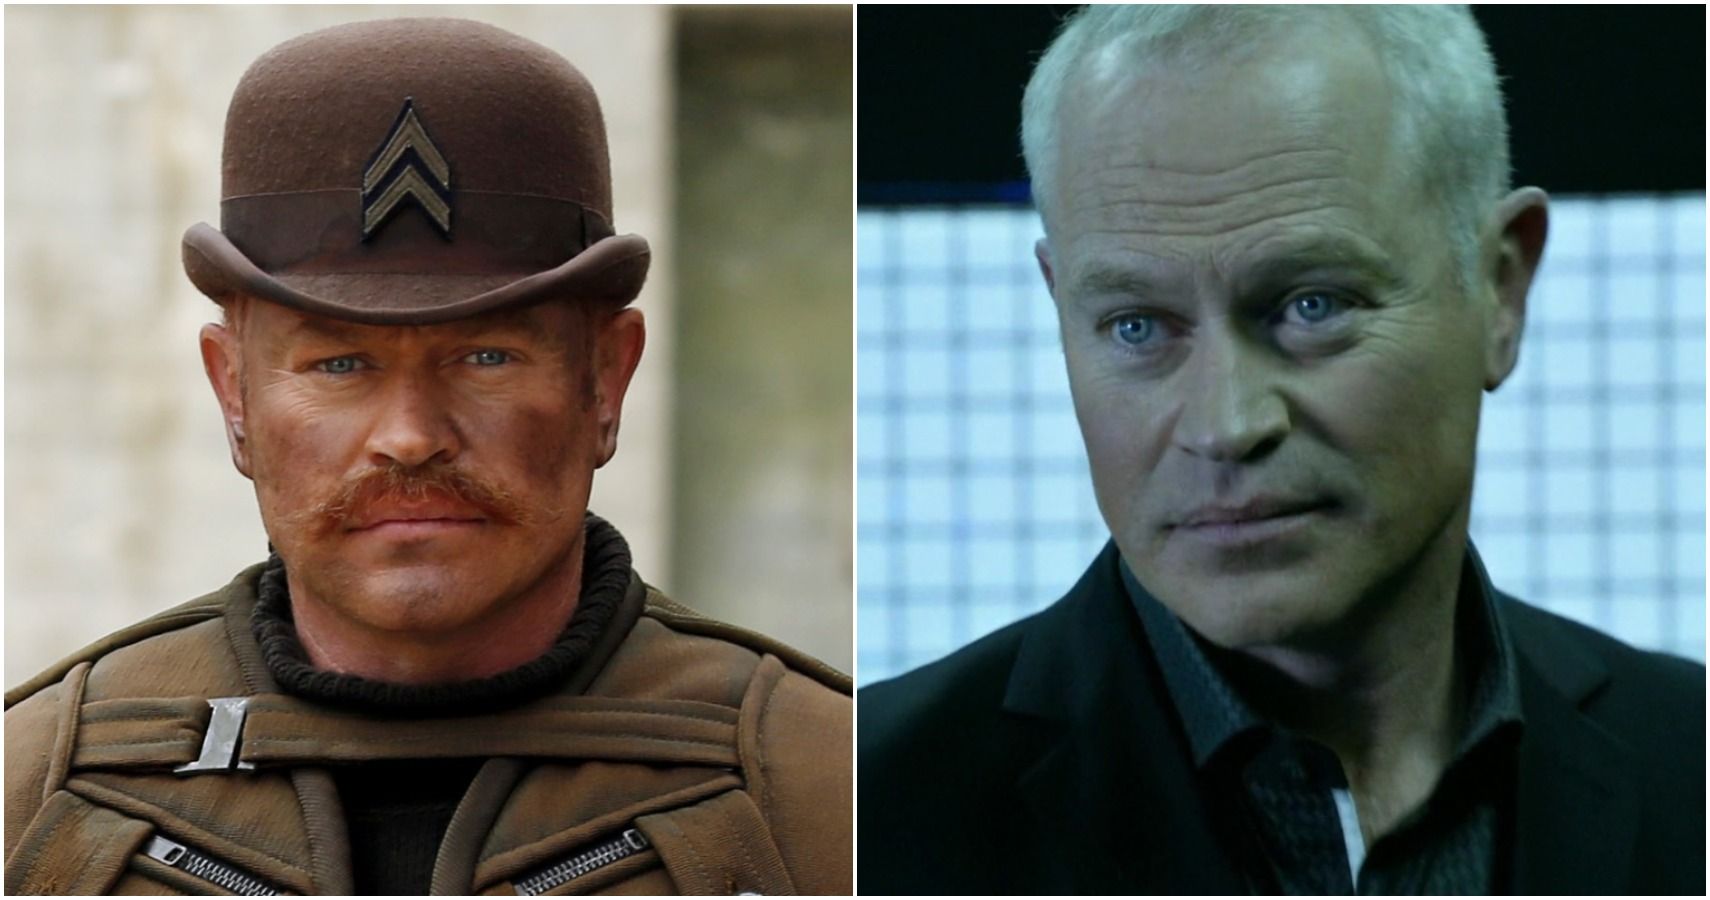 20 HQ Pictures Neal Mcdonough Action Movies Suits Star.